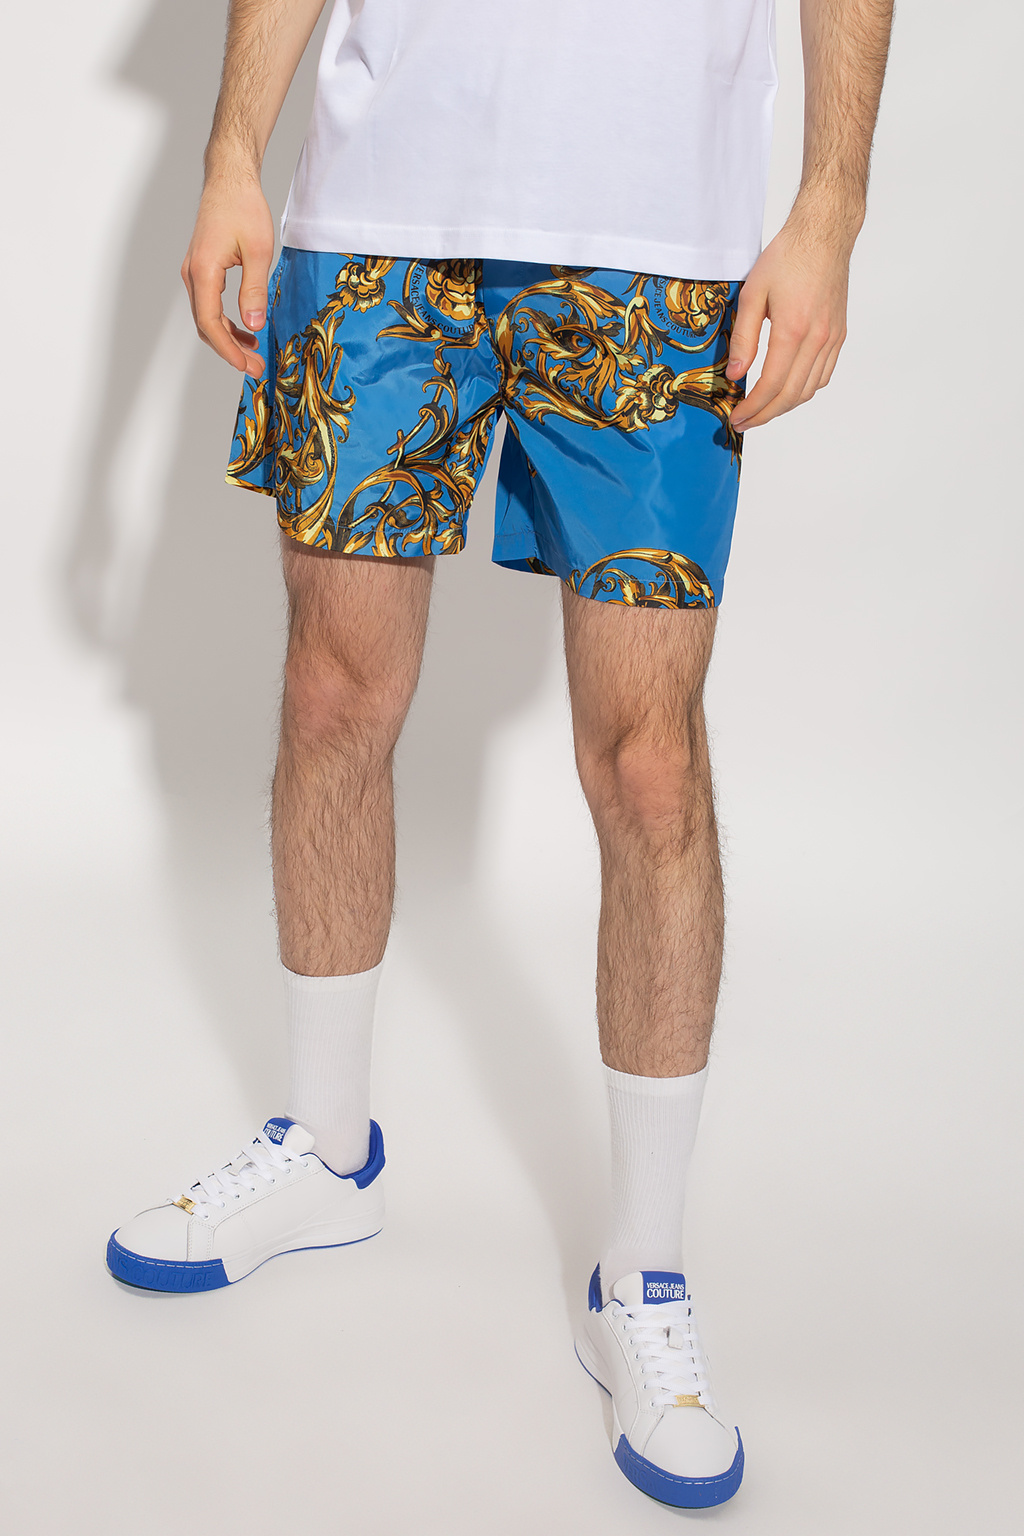 star rovic zip relaxed twill shorts d085665126724 sge Shorts with Regalia Baroque motif